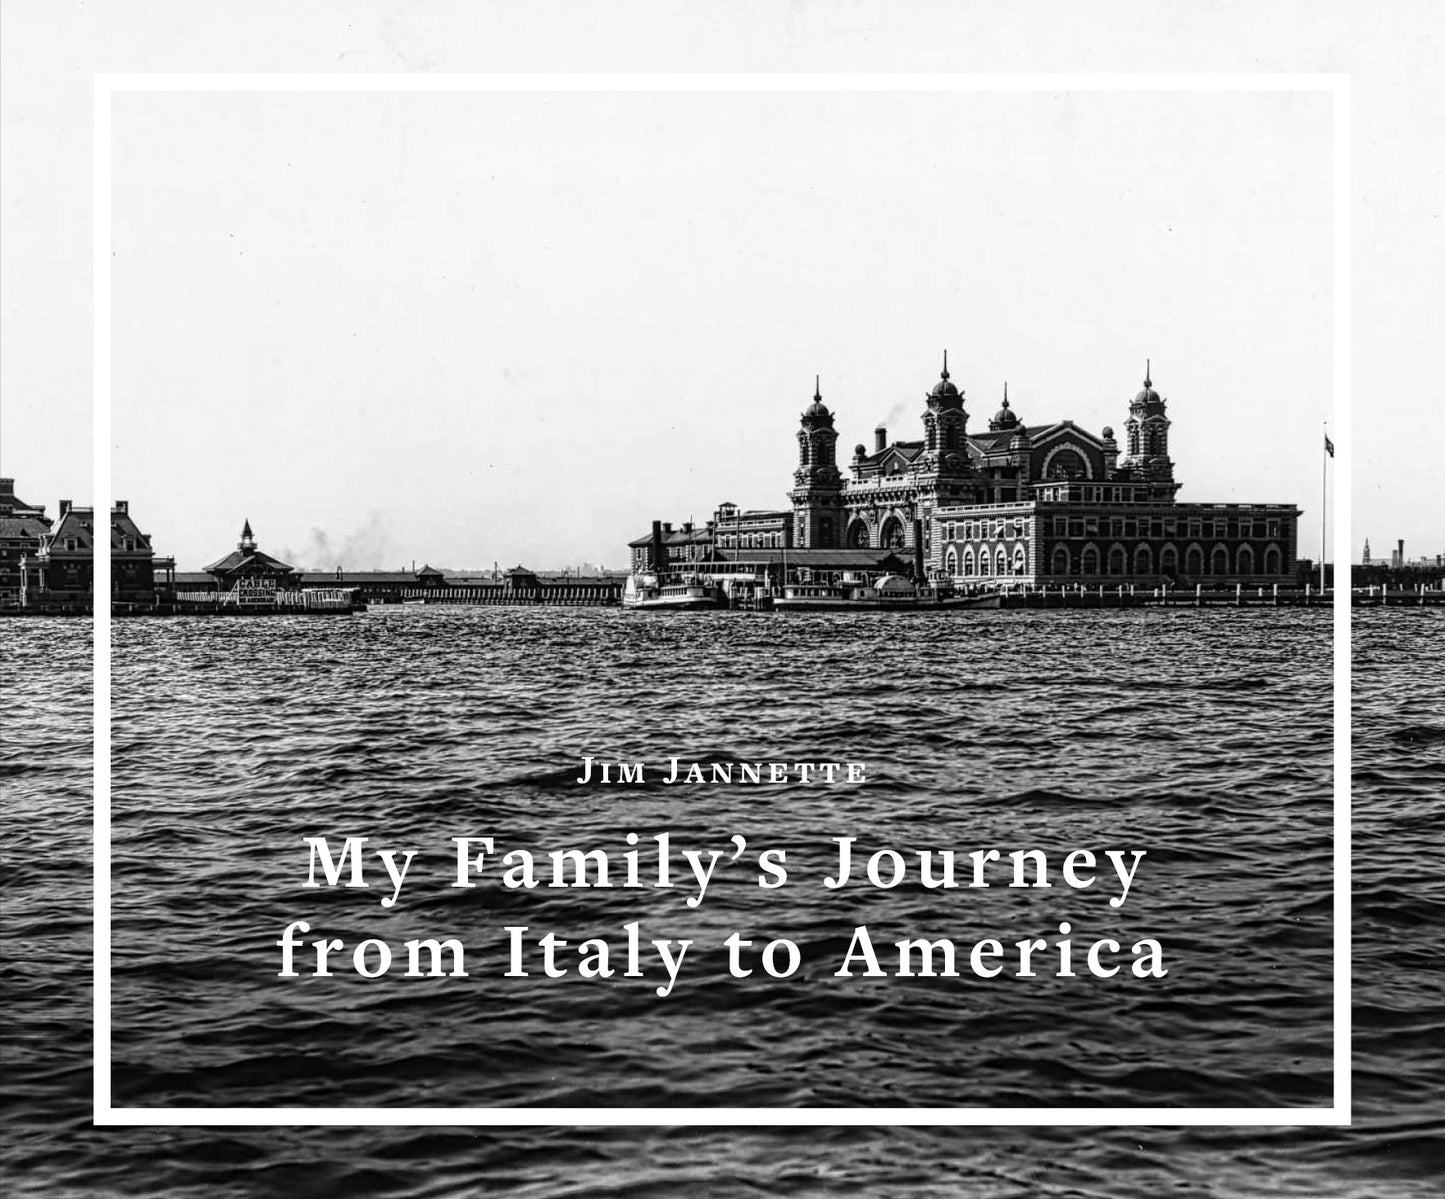 Jim Jannette: My Family’s Journey from Italy to America